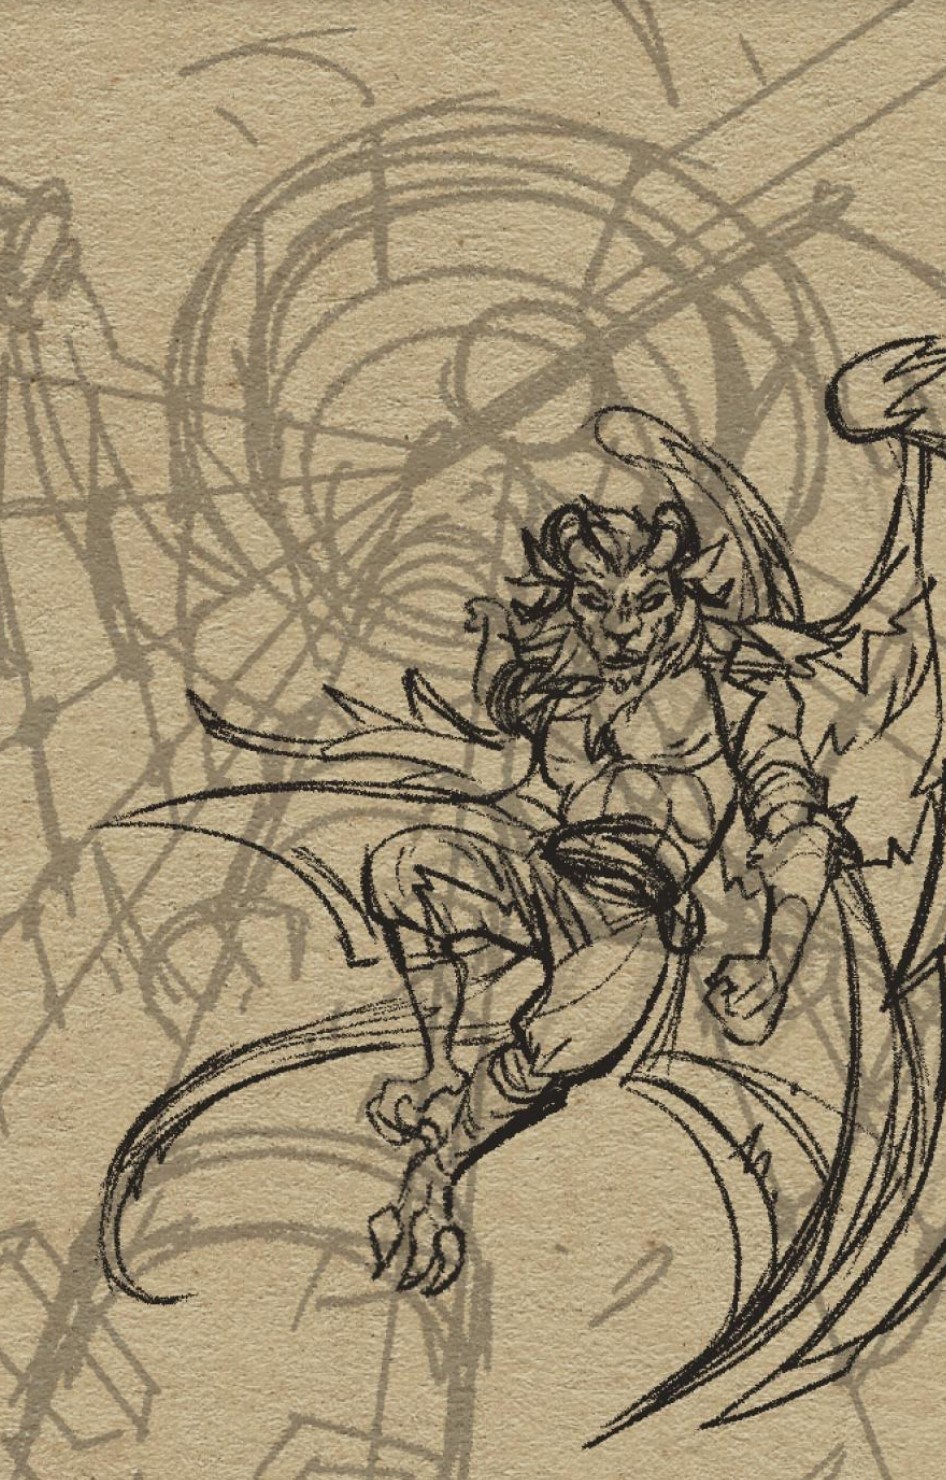 A sketch of the illustration above, that of a bipedal chimera character climbing up a pole to a crows nest. Lighting streaks across the sky above as the character gazes down past the viewer with a smarmy expression.